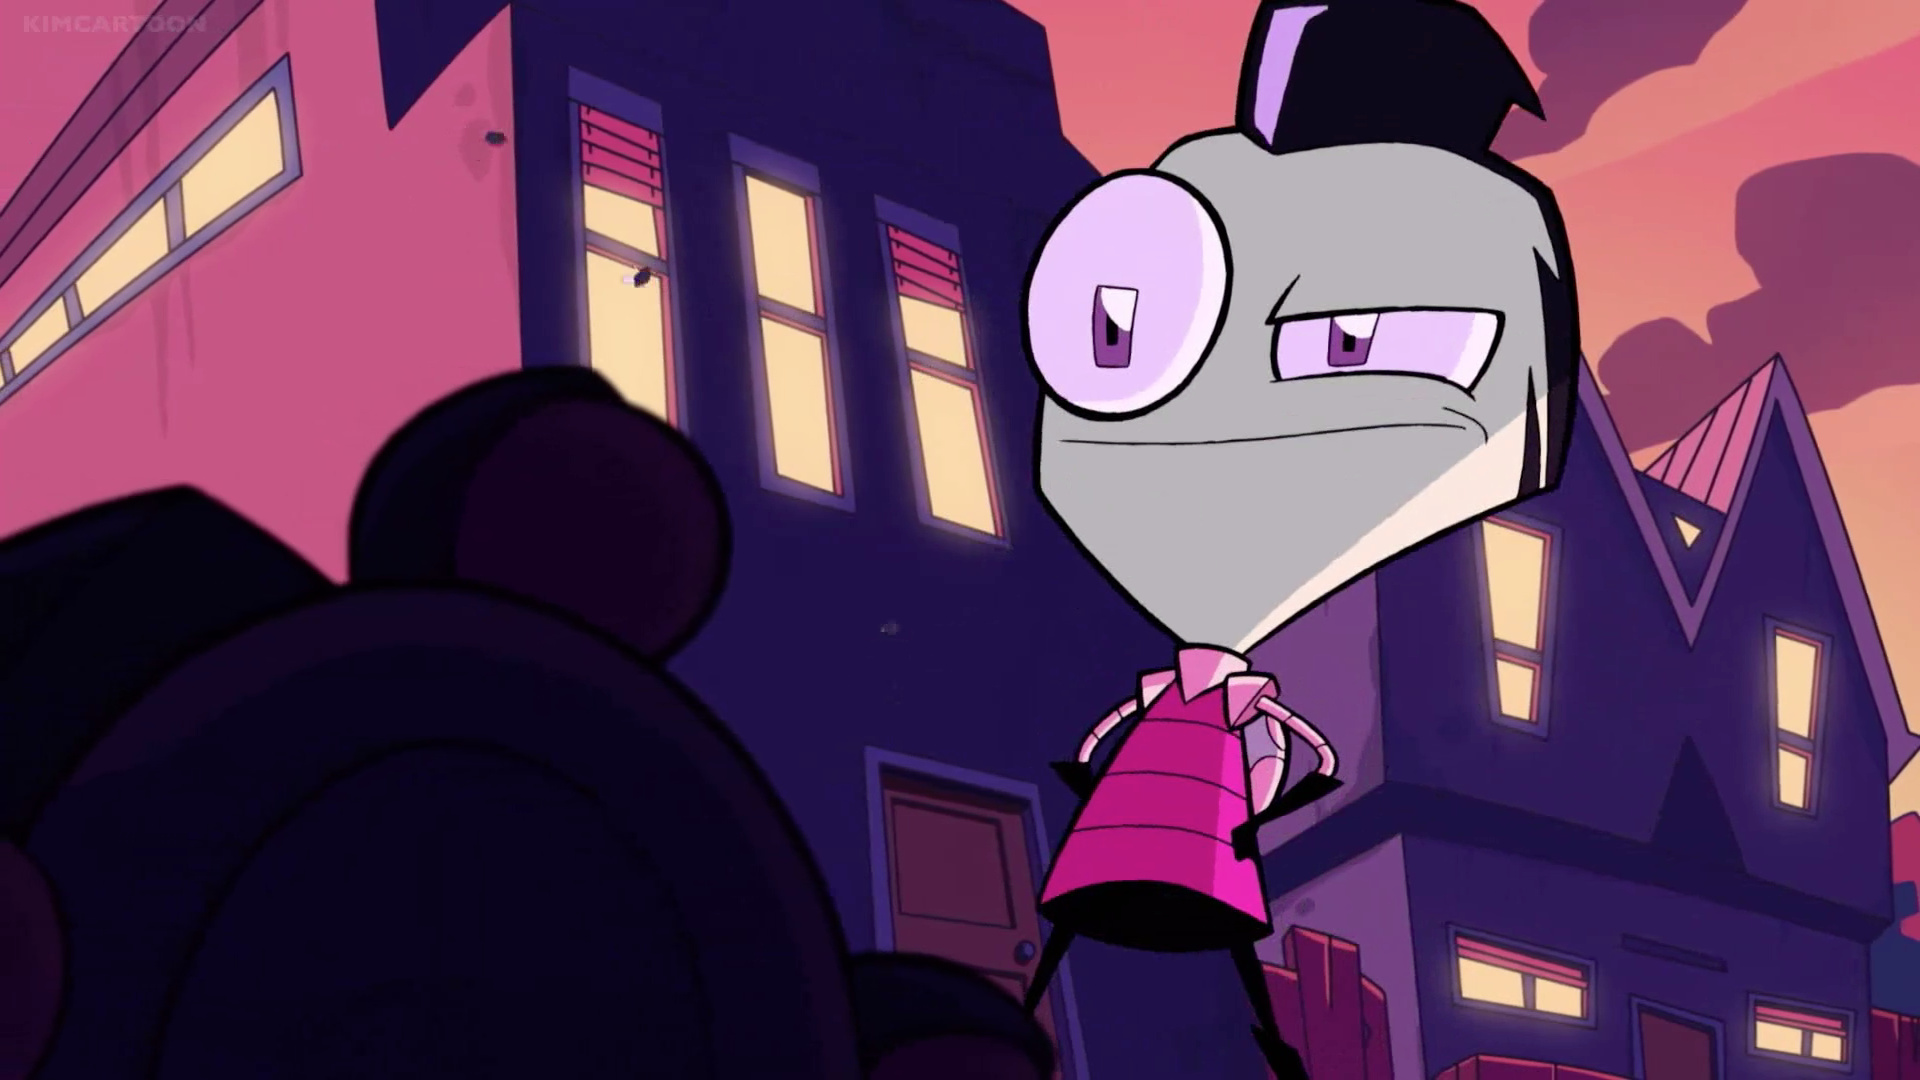 Invader ZIM, Buzz Buzz, Cool animations, Iconic characters, 1920x1080 Full HD Desktop